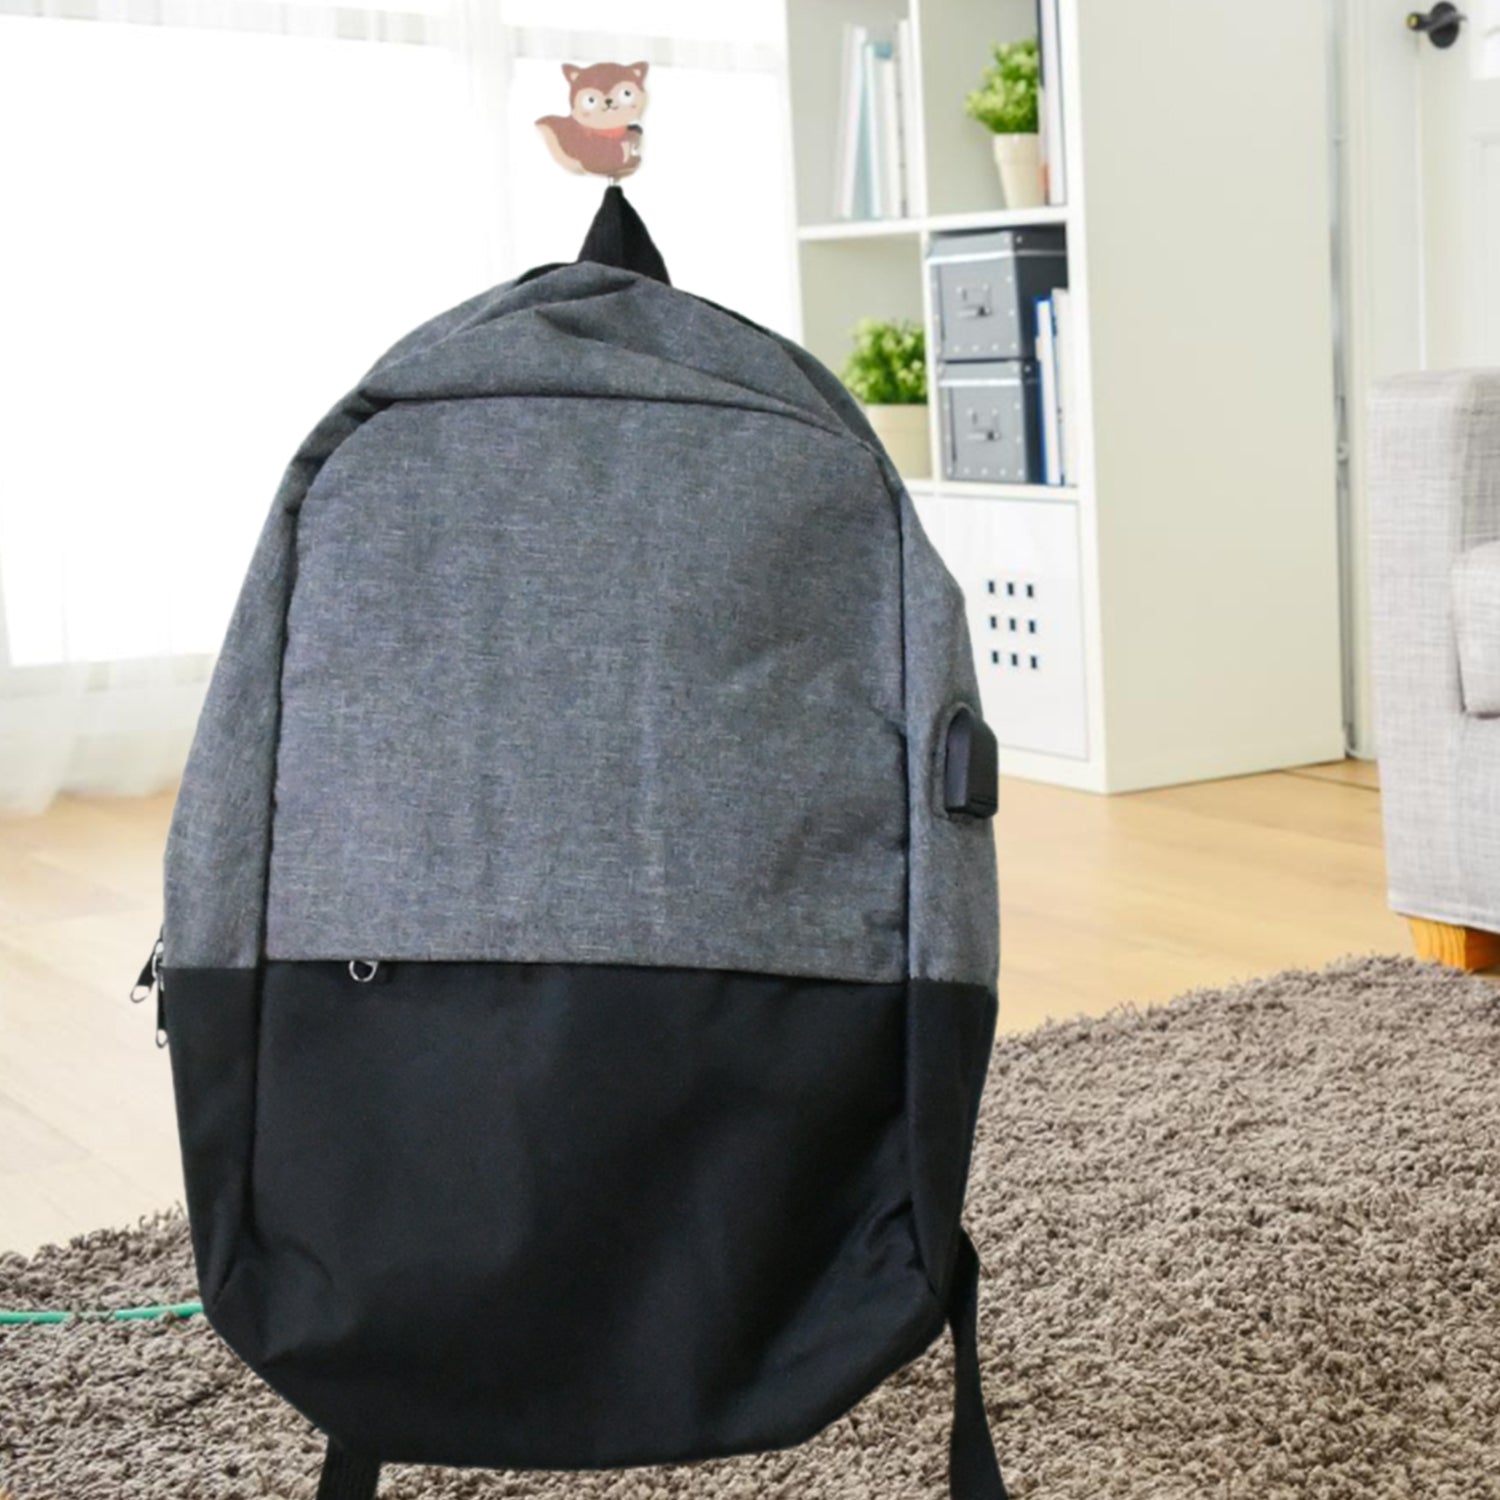 12826 USB Point Laptop Bag Used Widely In All Kinds Of Official Purposes As A Laptop Holder And Cover And Make's The Laptop Safe And Secure (1 pc)